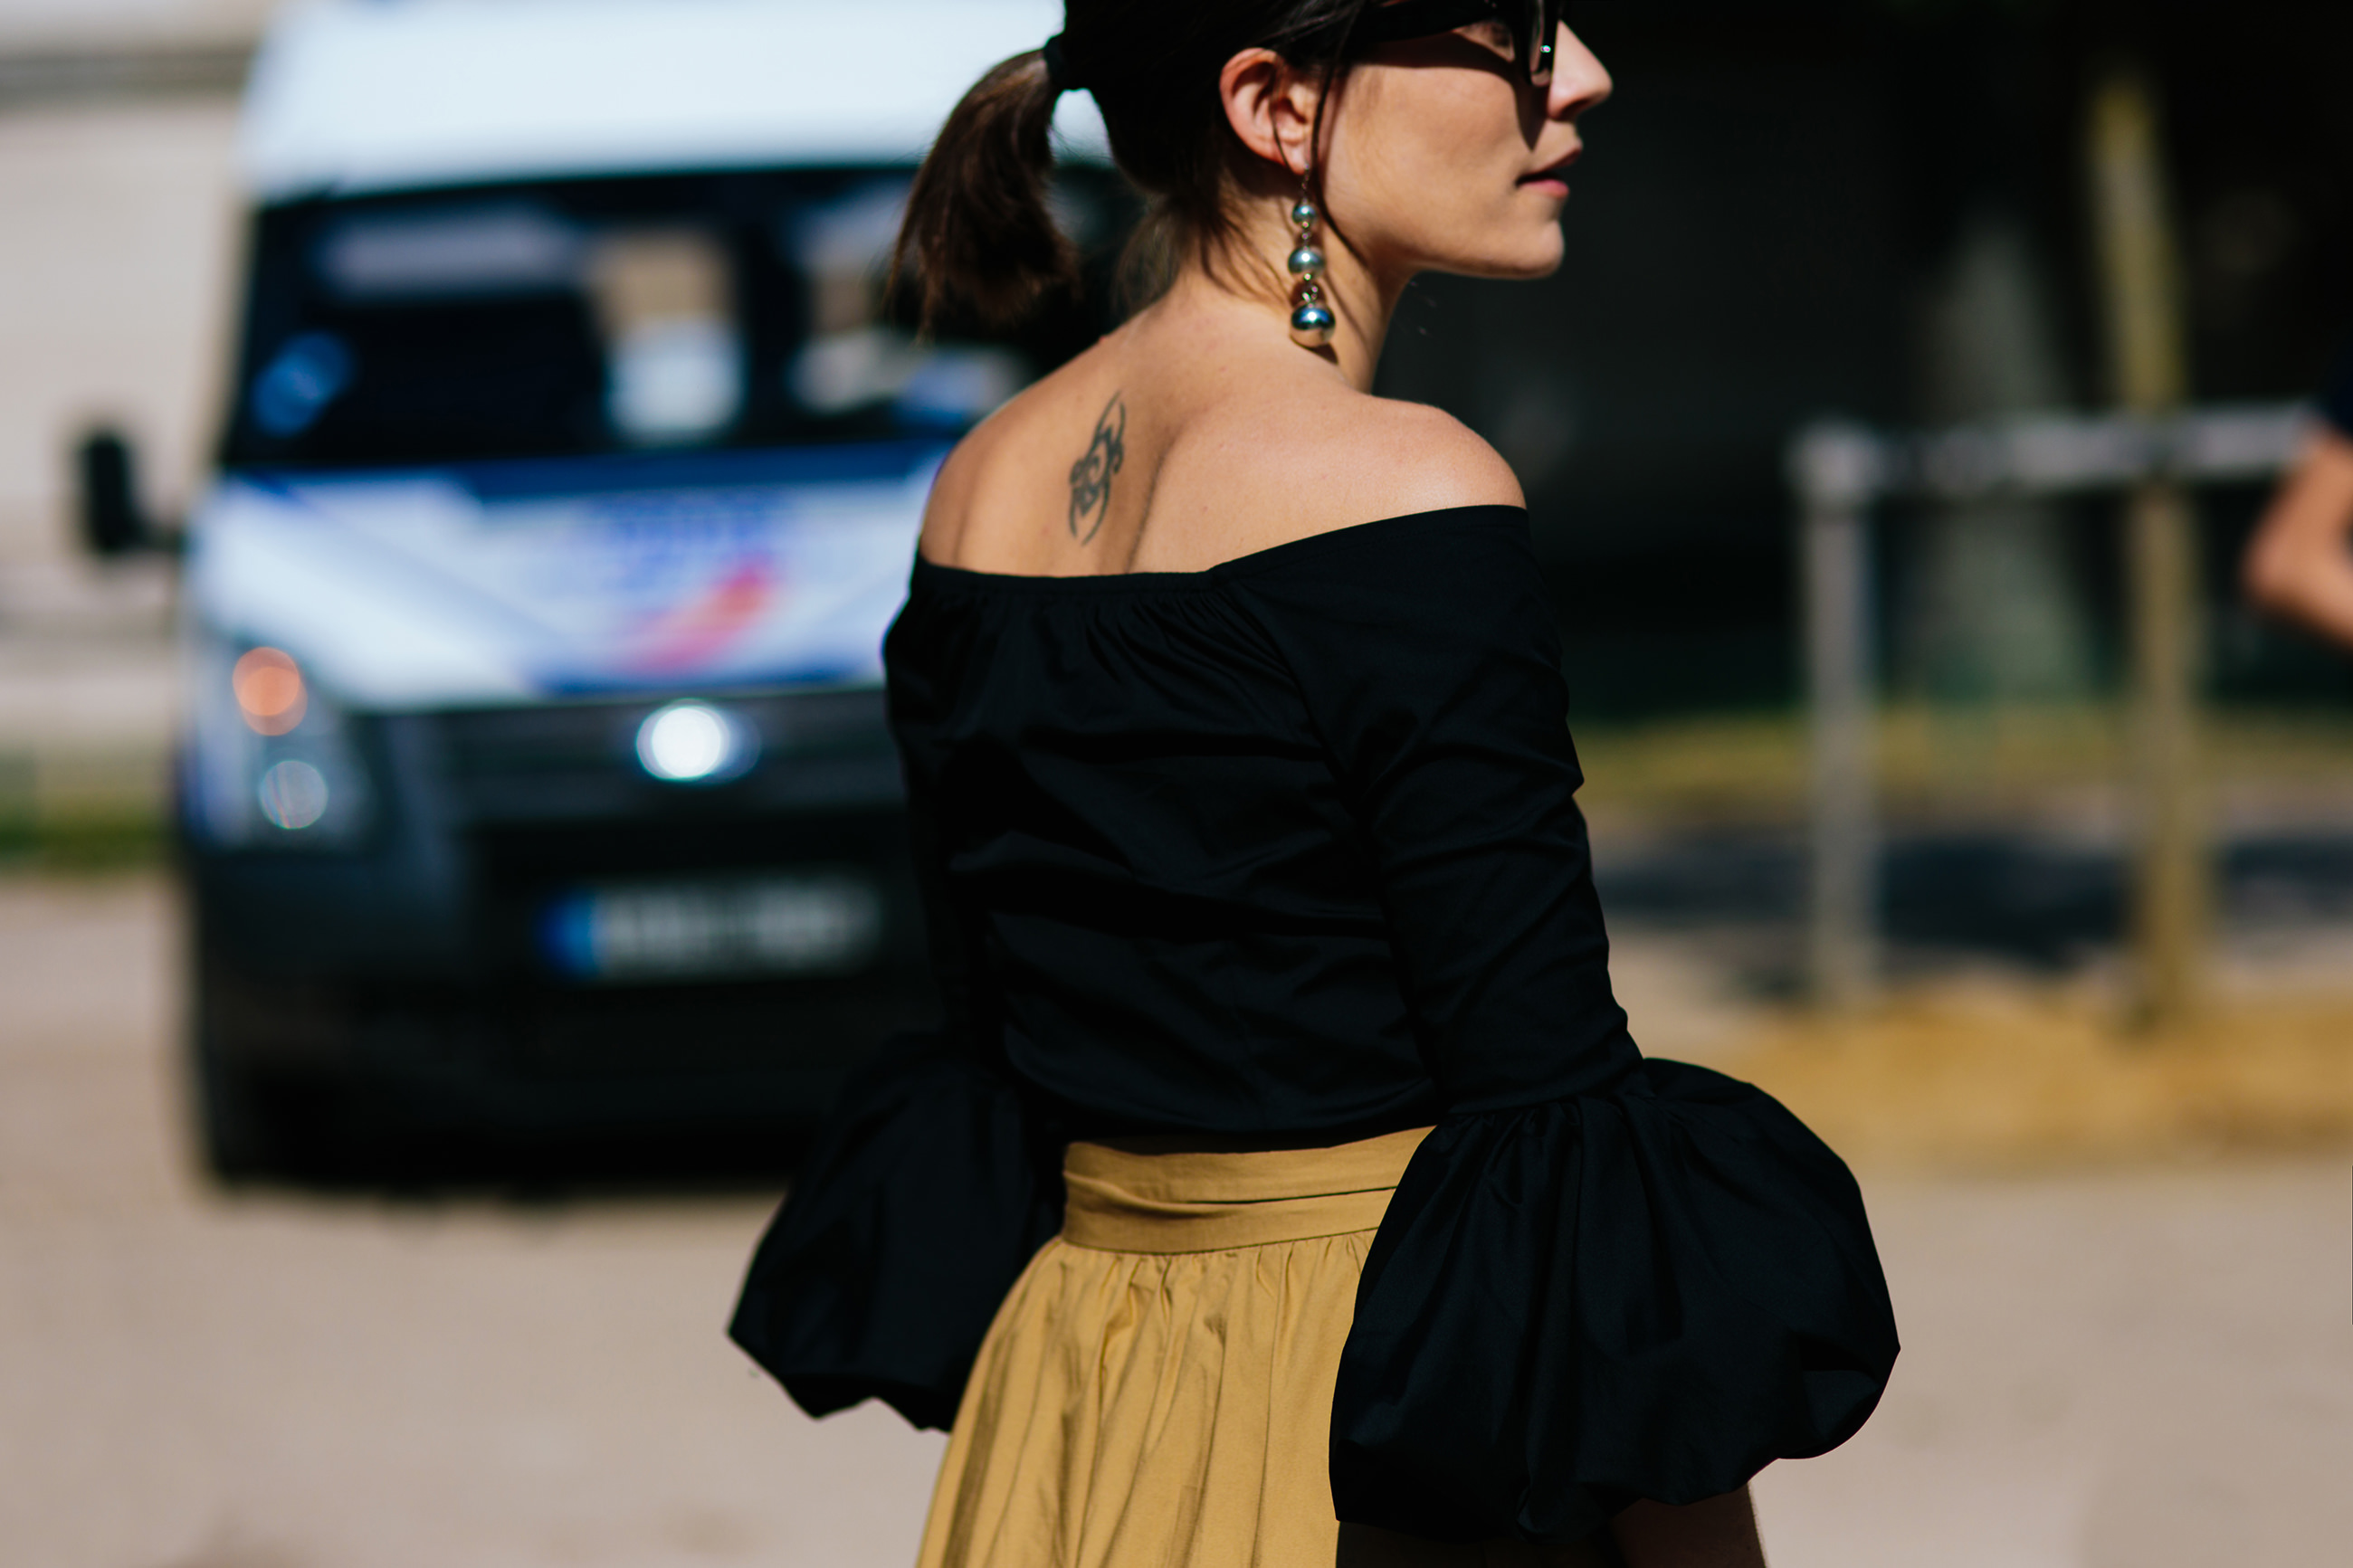 Blogger Carola Pojer wearing a black top and brown ruffled skirt before Chanel Haute Couture fashion show in Paris, France